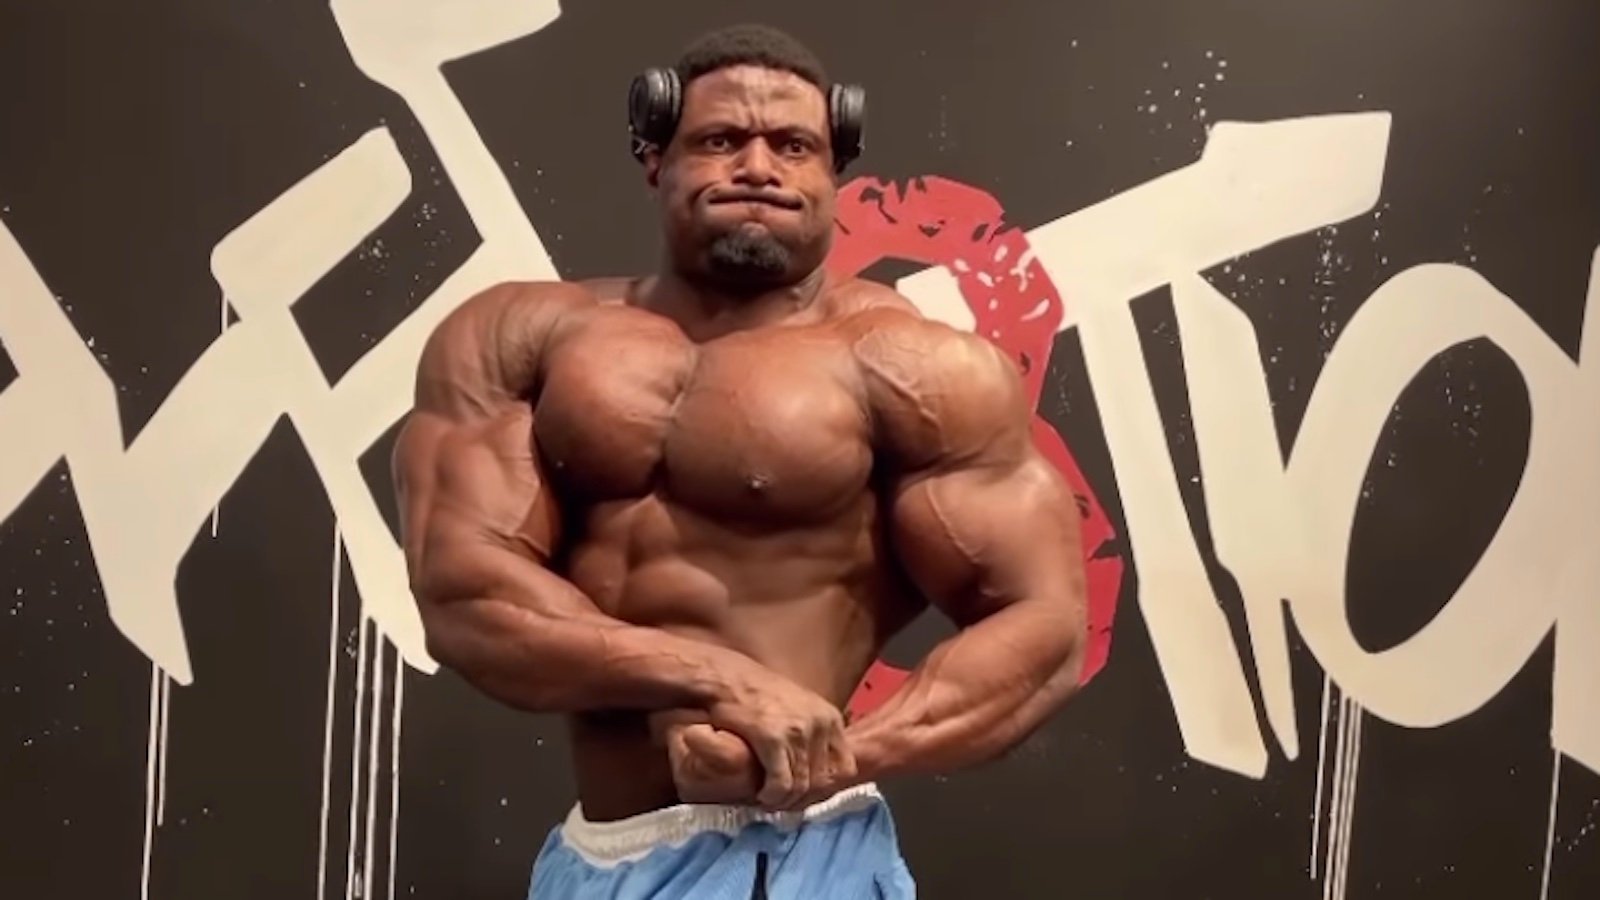 andrew-jacked's-trainer-thinks-his-“best”-will-come-at-2023-arnold-classic-–-breaking-muscle